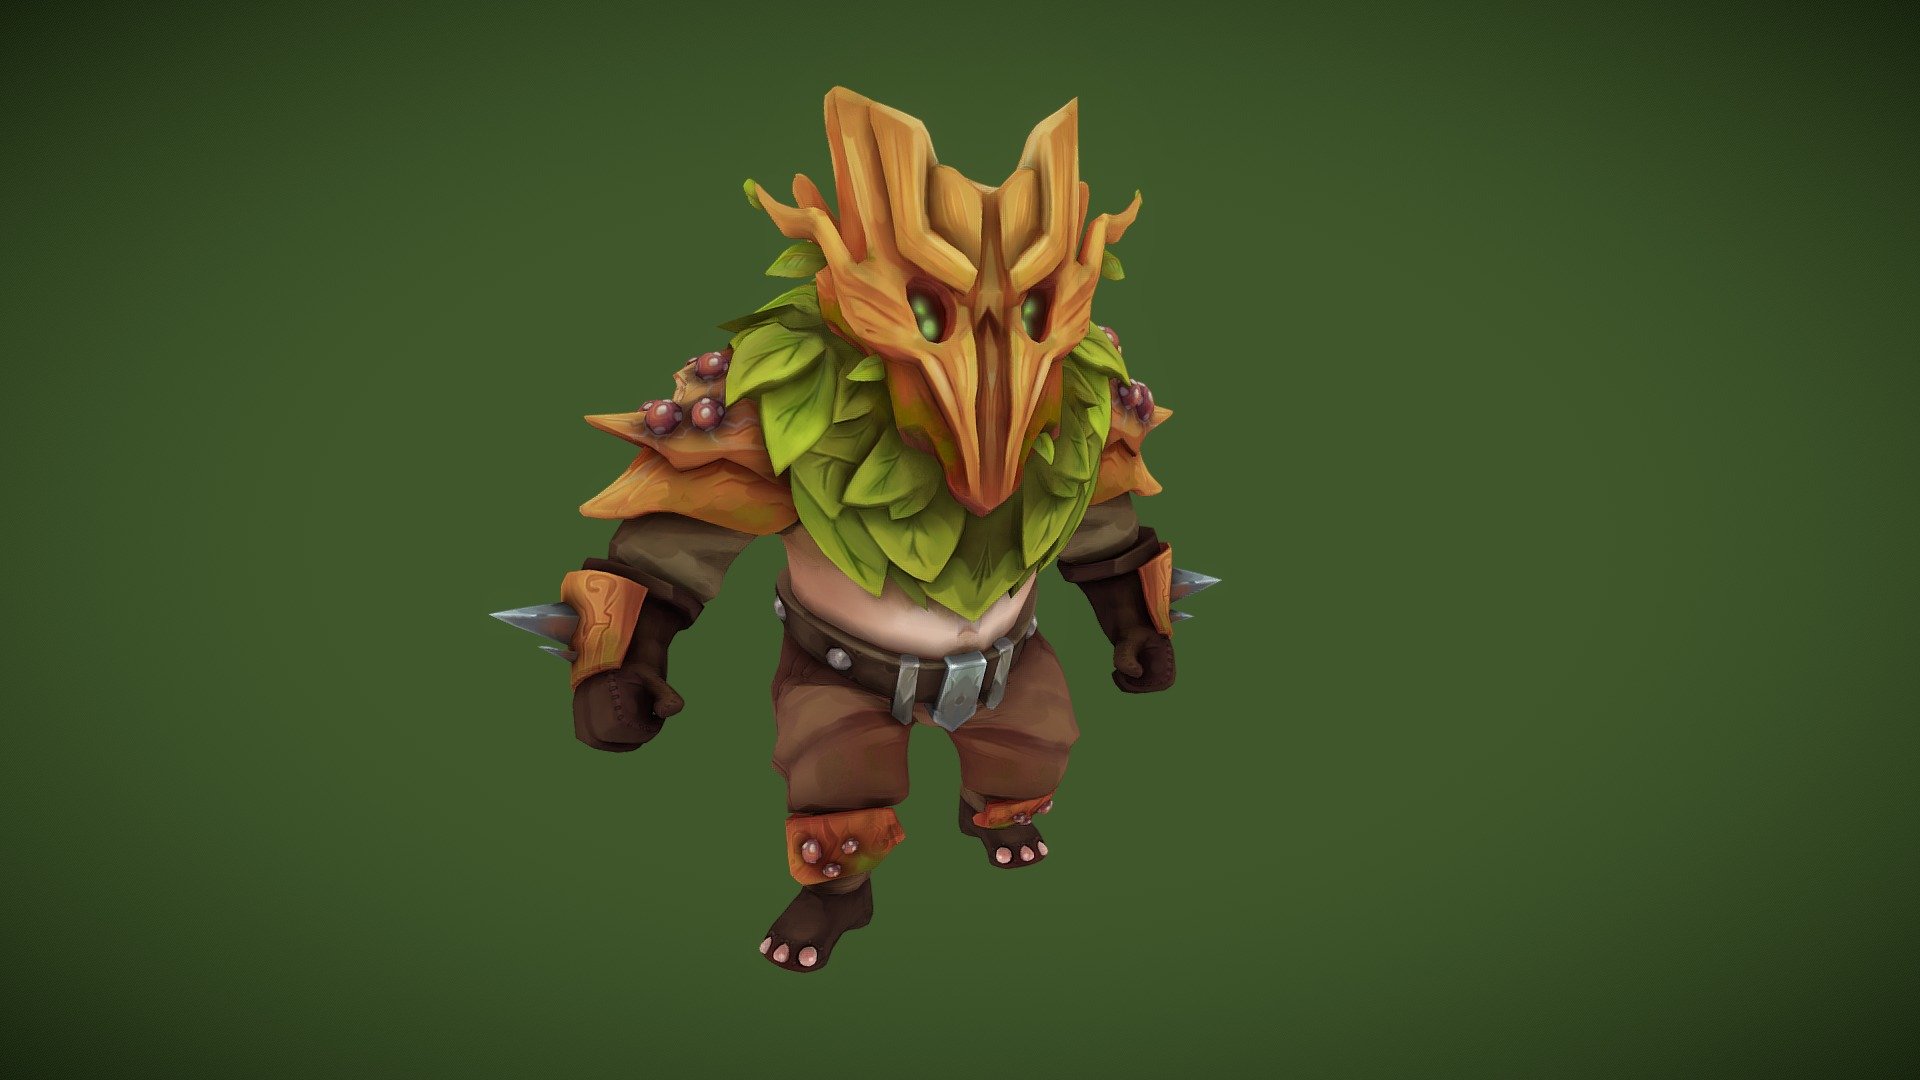 Stylized character for a project.

Software used: Zbrush, Autodesk Maya, Autodesk 3ds Max, Substance Painter - Stylized Stump Minion - 3D model by N-hance Studio (@Malice6731) 3d model